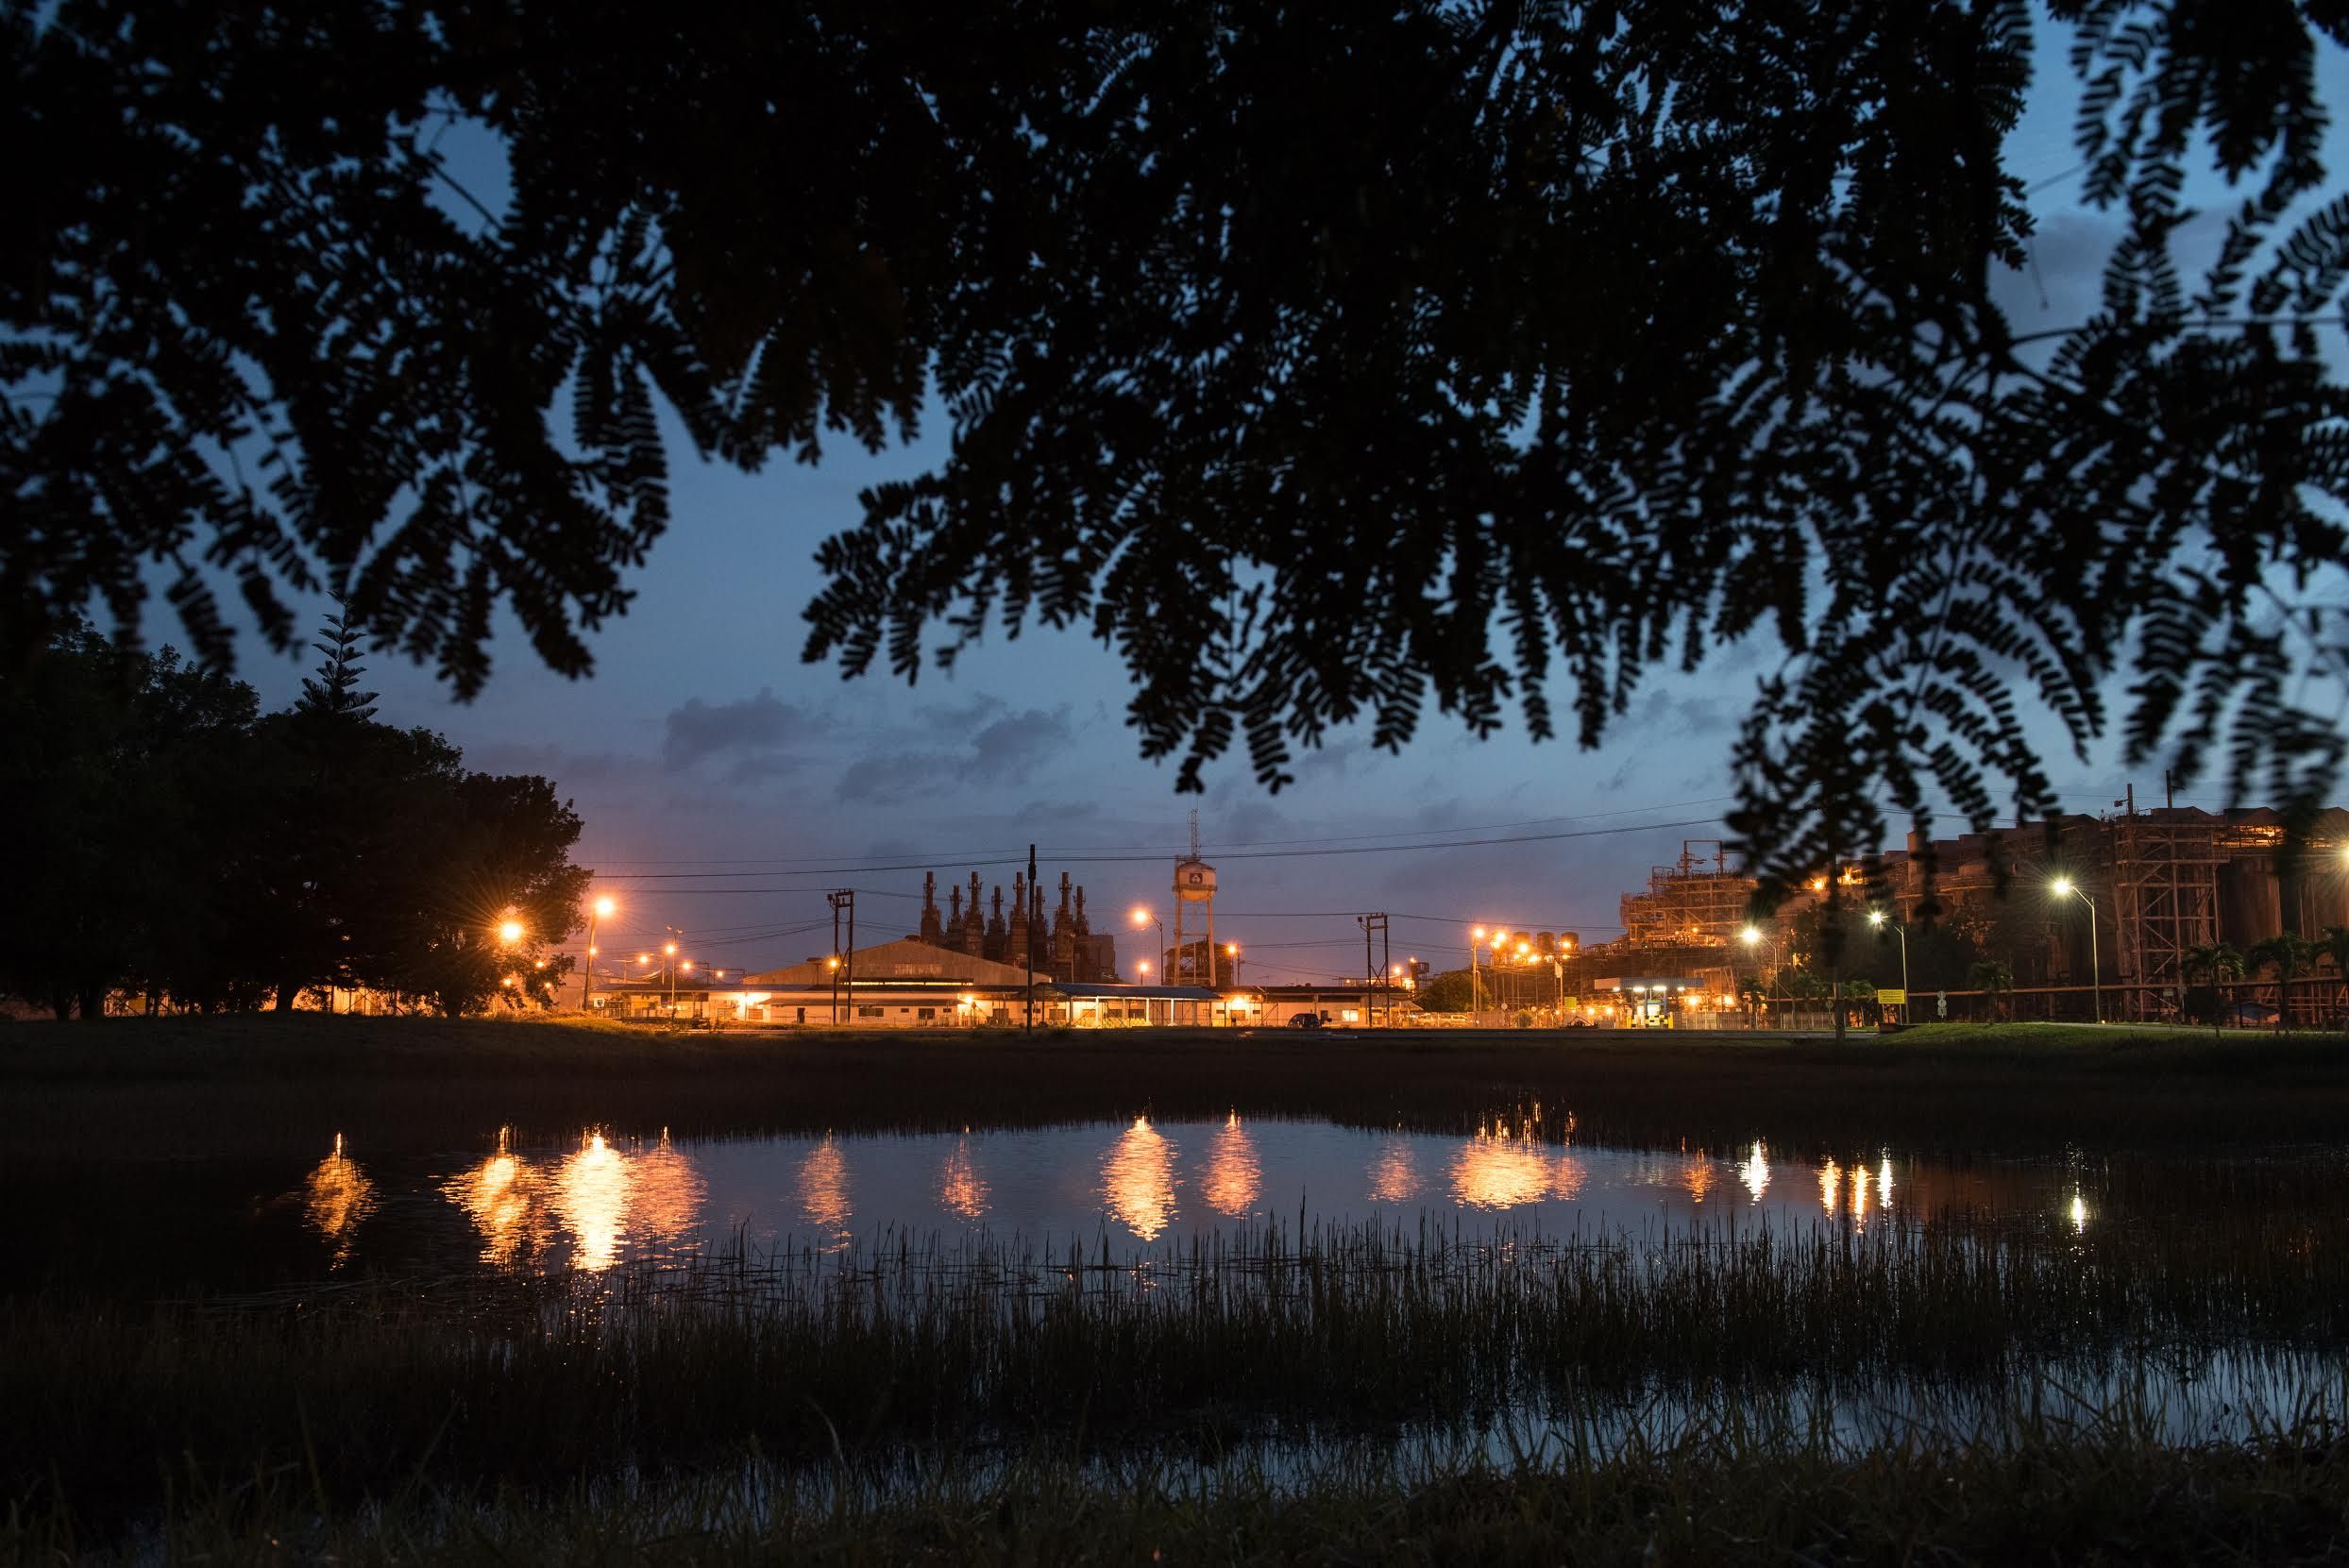 The sky at dusk is cut by the orange glow of the refinery at the Paranam Operations for Suralco, a subsidiary of Alcoa. The plant is no longer operational. Image by Stephanie Strasburg/Pittsburgh Post-Gazette. Suriname, 2017.